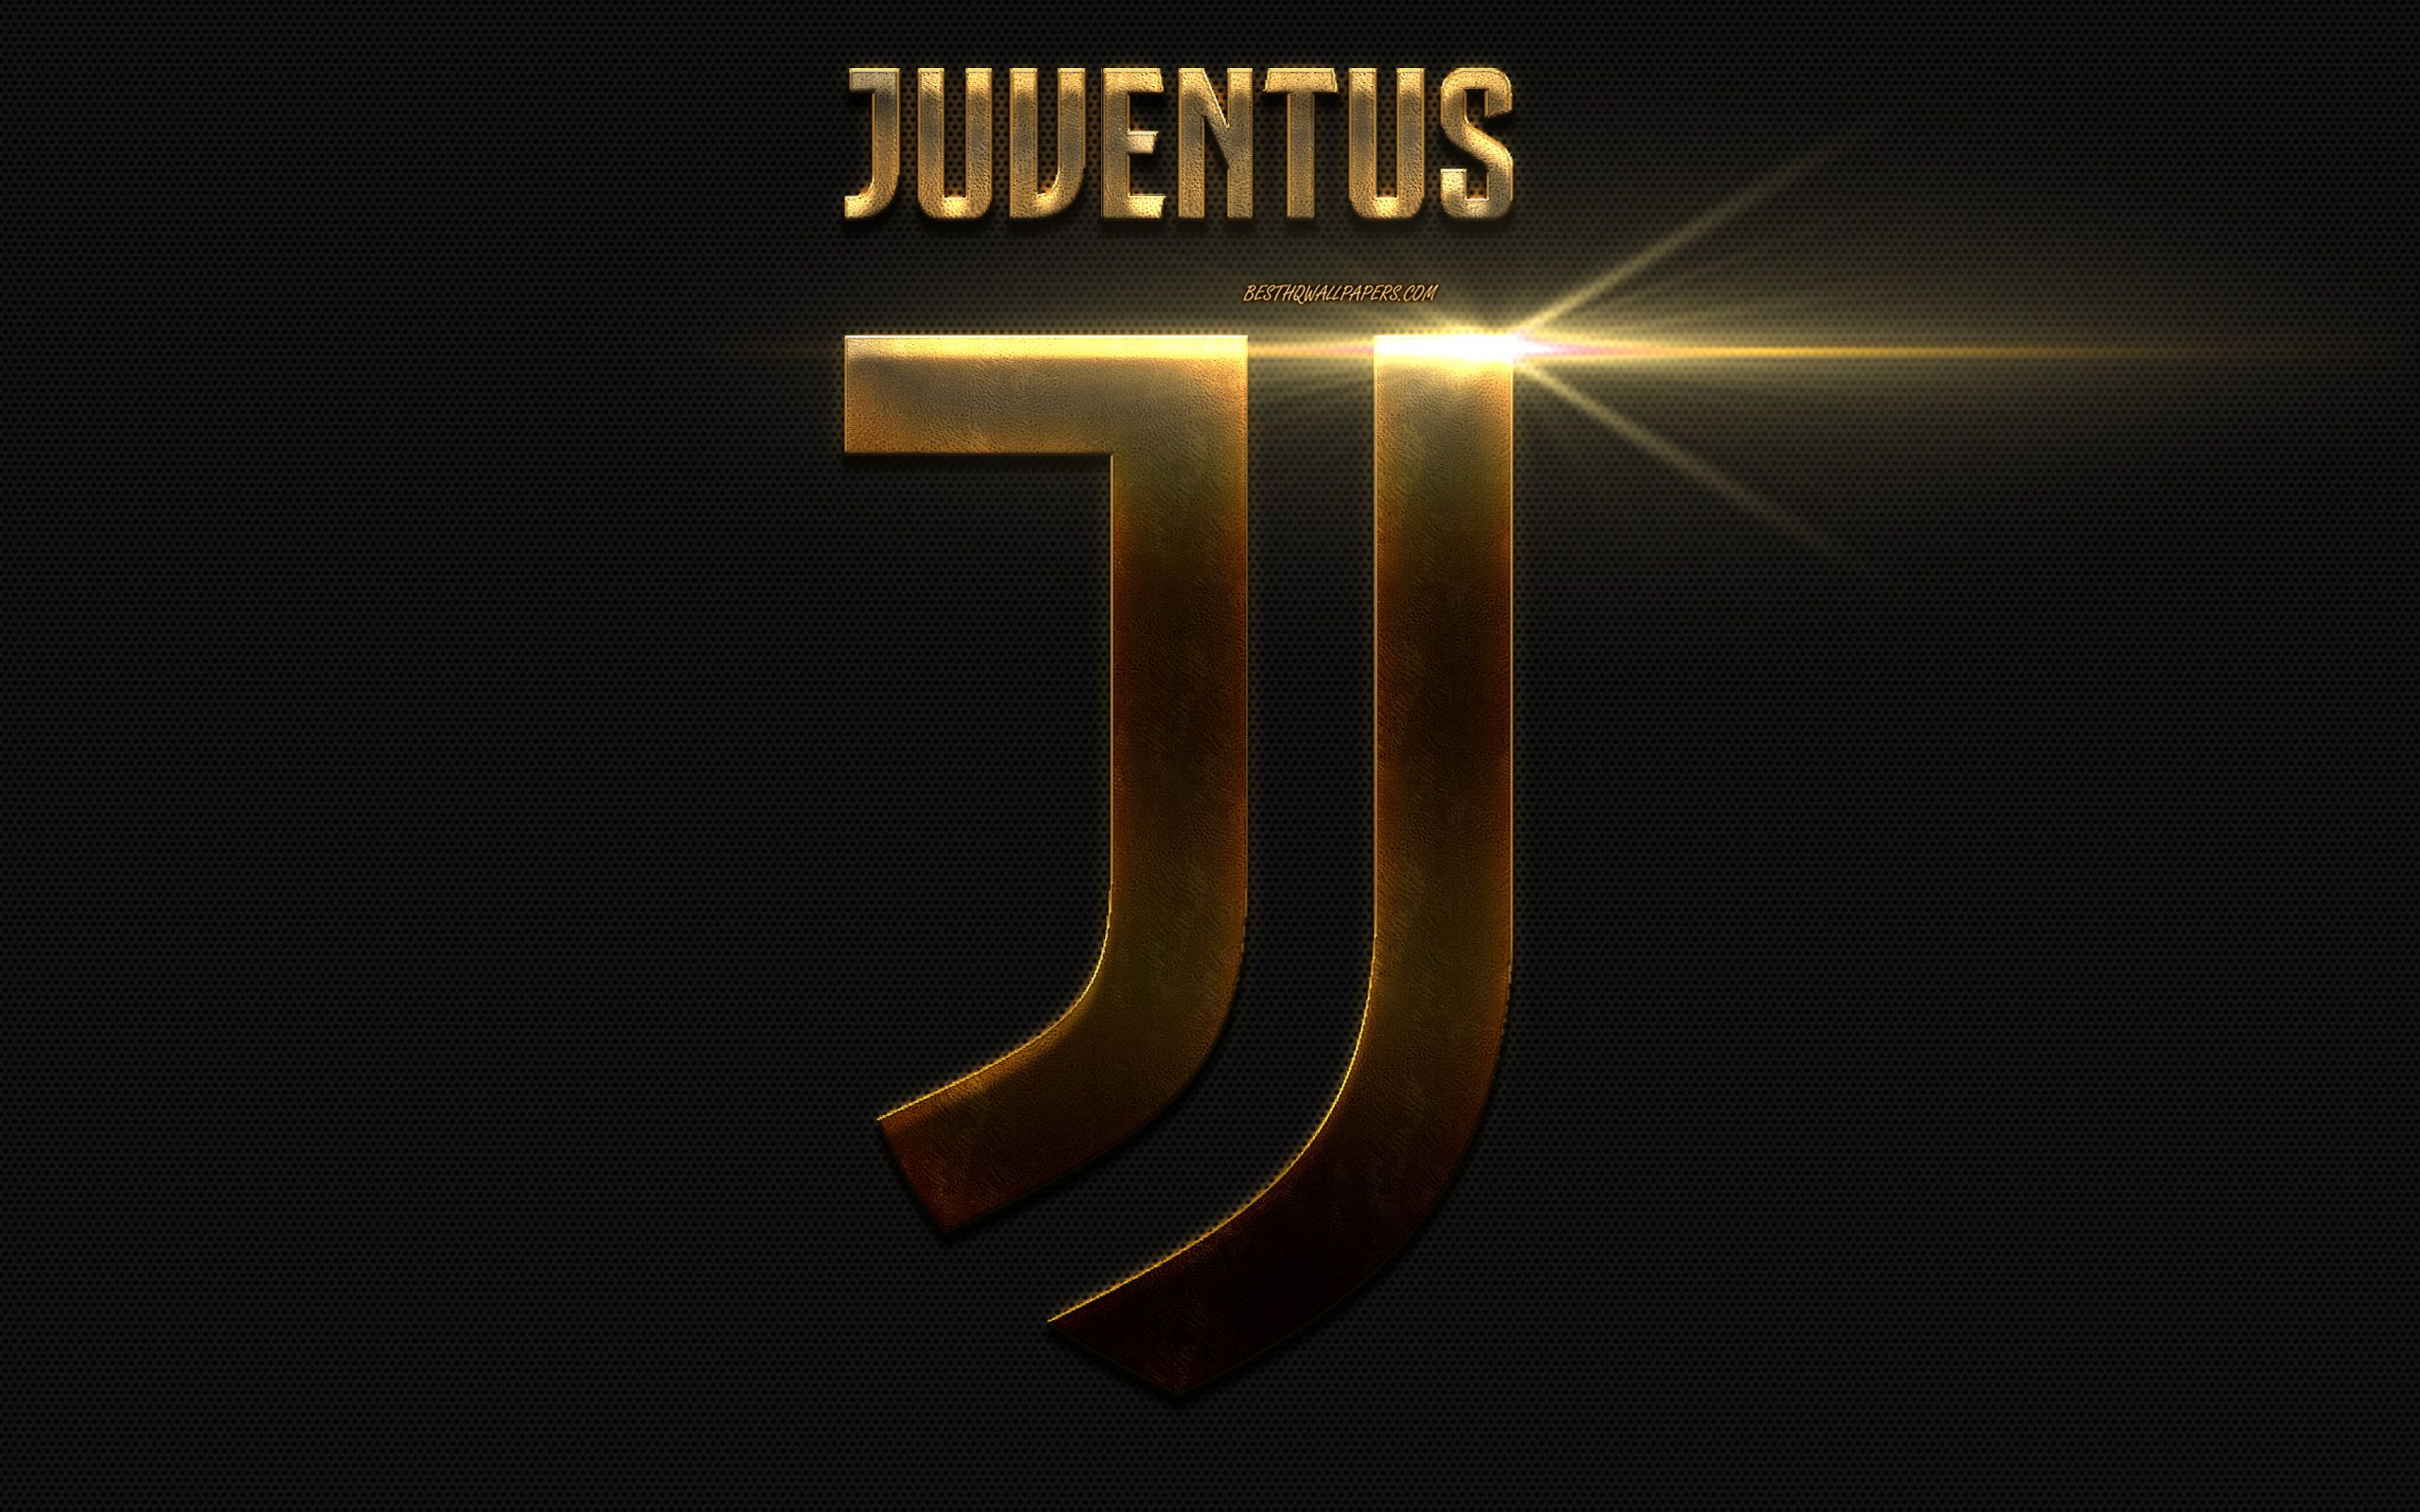 Download wallpaper Juventus FC, gold metal logo, Italian football club, new emblem, neon light, metal mesh texture, Turin, Italy, Serie A, Juve for desktop with resolution 2560x1600. High Quality HD picture wallpaper